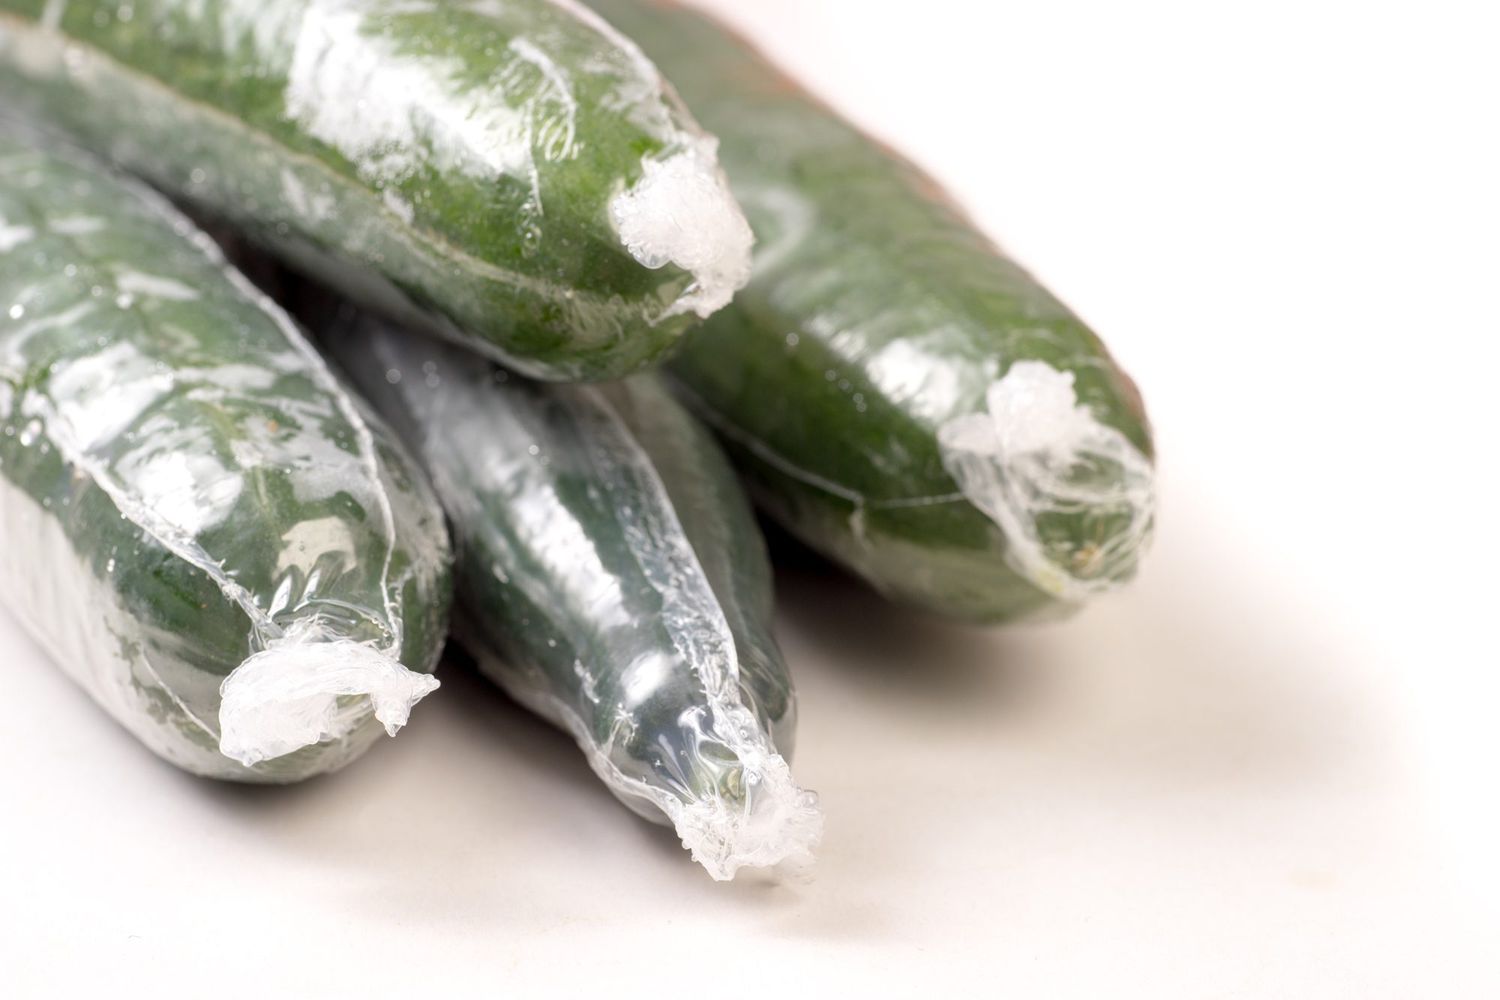 How To Store English Cucumbers In The Fridge